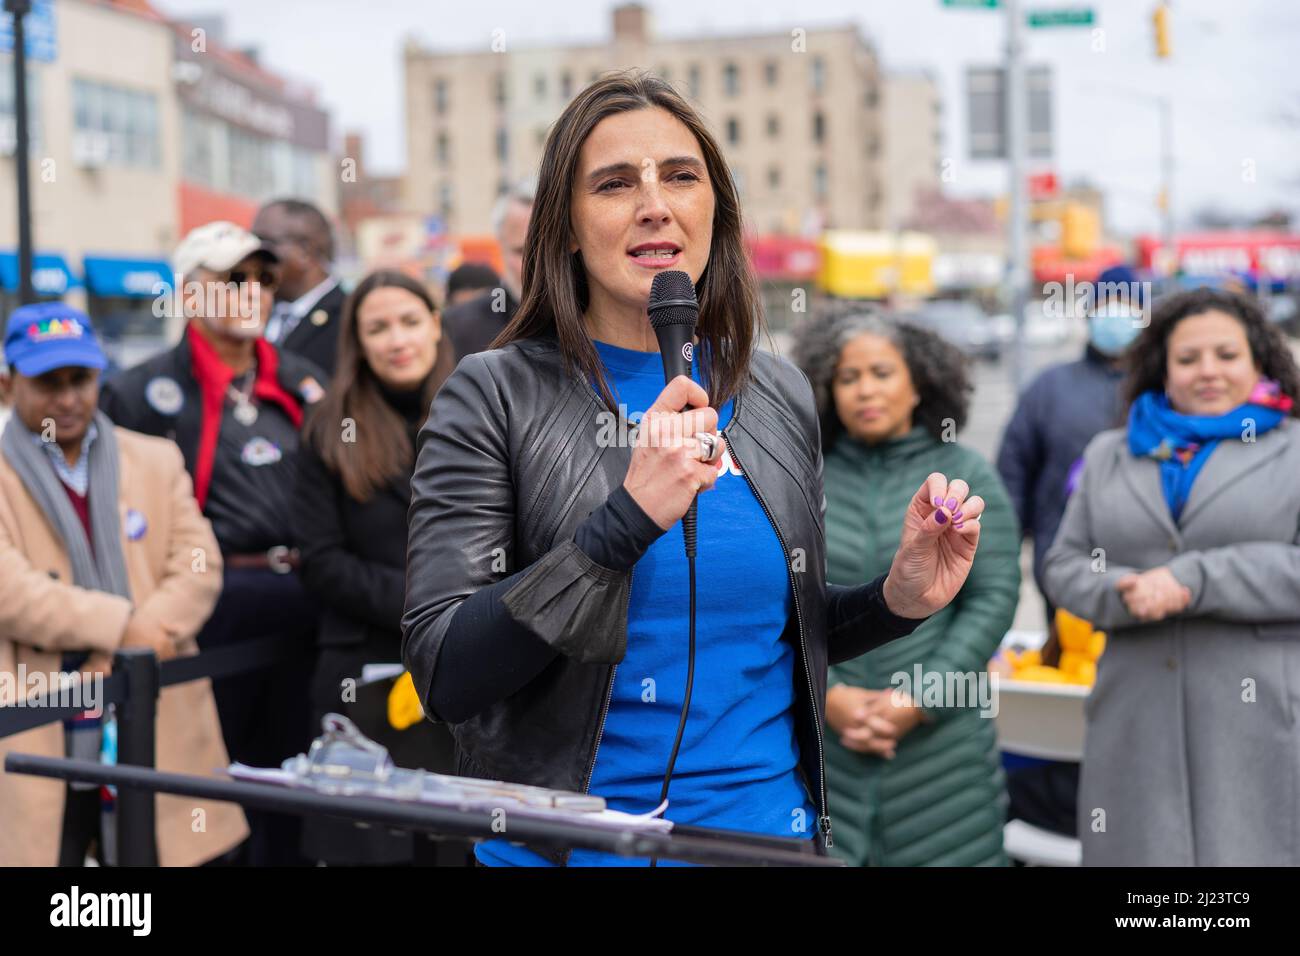 Bronx, United States. 27th Mar, 2022. Anna Martha Visky of Our Revolution joins Rep. Alexandria Ocasio-Cortez held a re-election campaign rally in the Bronx. Ocasio-Cortez needs to collected 1, 250 signatures by April 7th to be on the 2022 ballot. (Photo by Steve Sanchez/Pacific Press) Credit: Pacific Press Media Production Corp./Alamy Live News Stock Photo